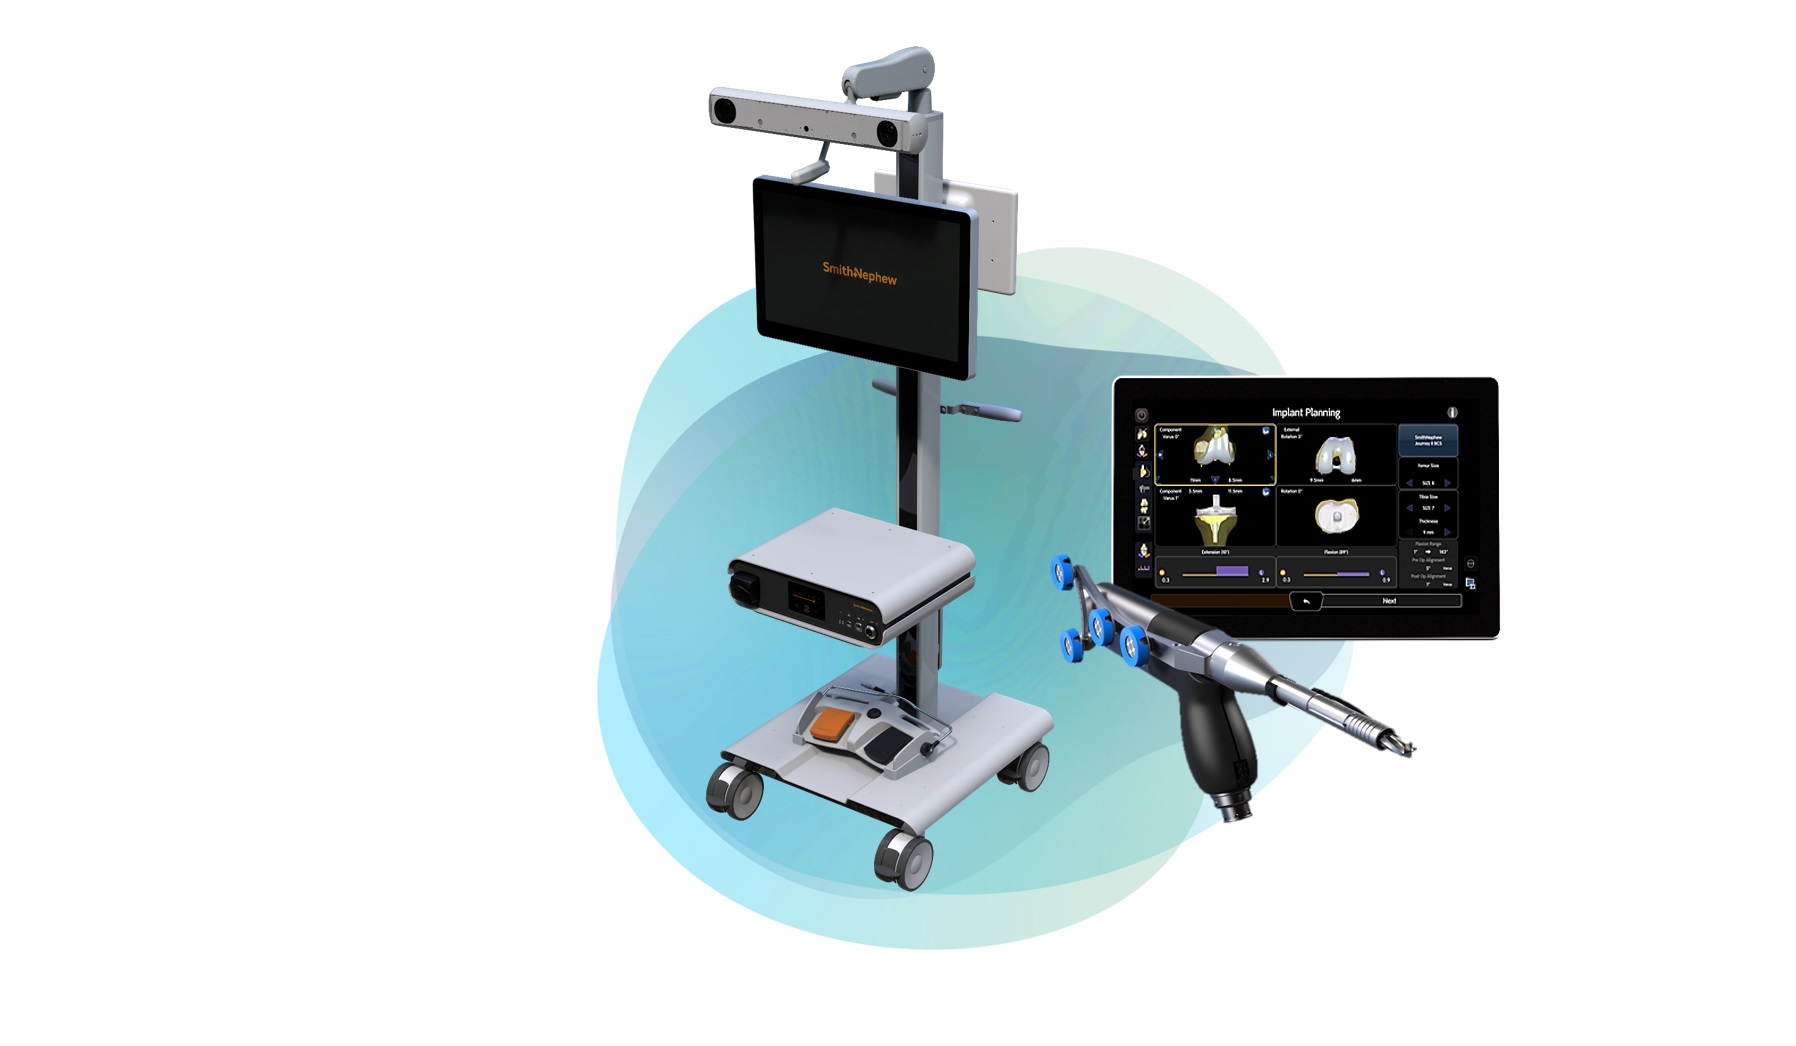 Smith+Nephew expands next-generation, handheld robotic-assisted CORI◊ Surgical System, into total hip arthroplasty with RI.HIP NAVIGATION